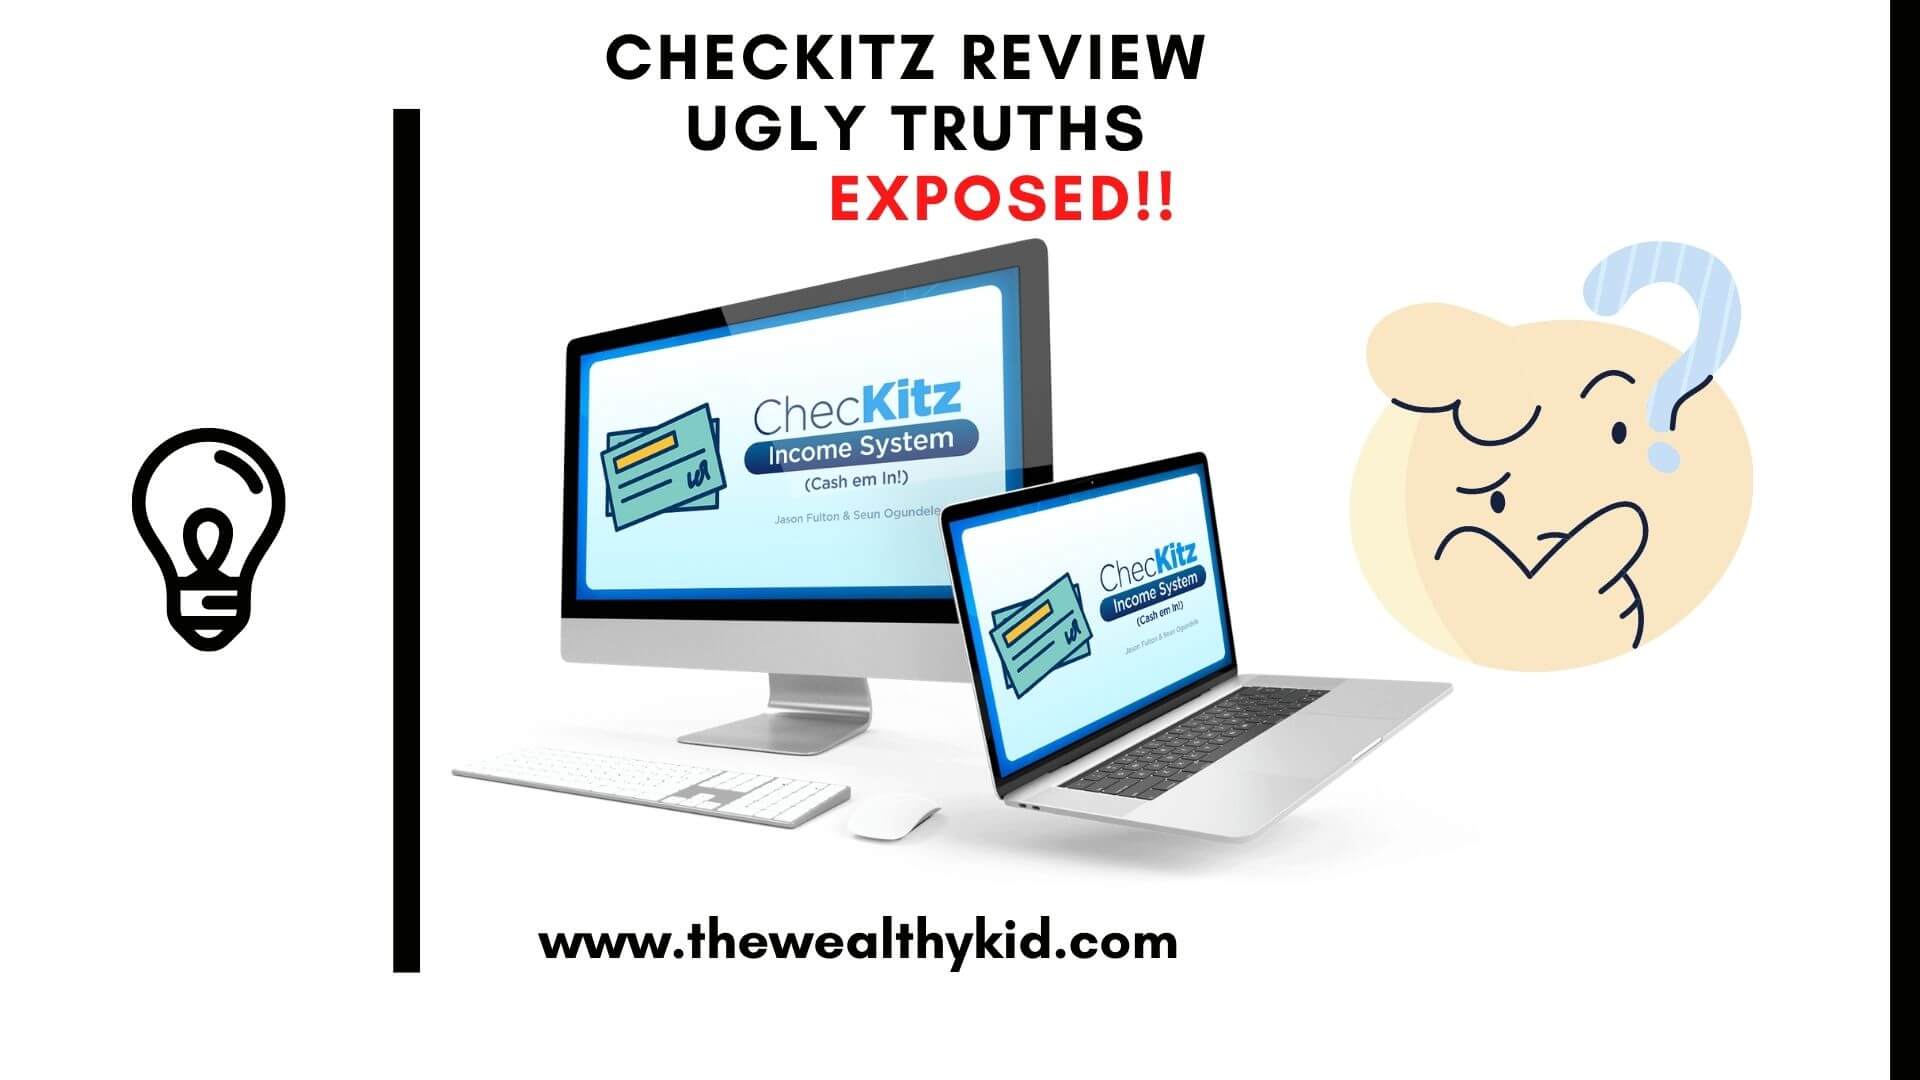 Checkitz review - Featured Image